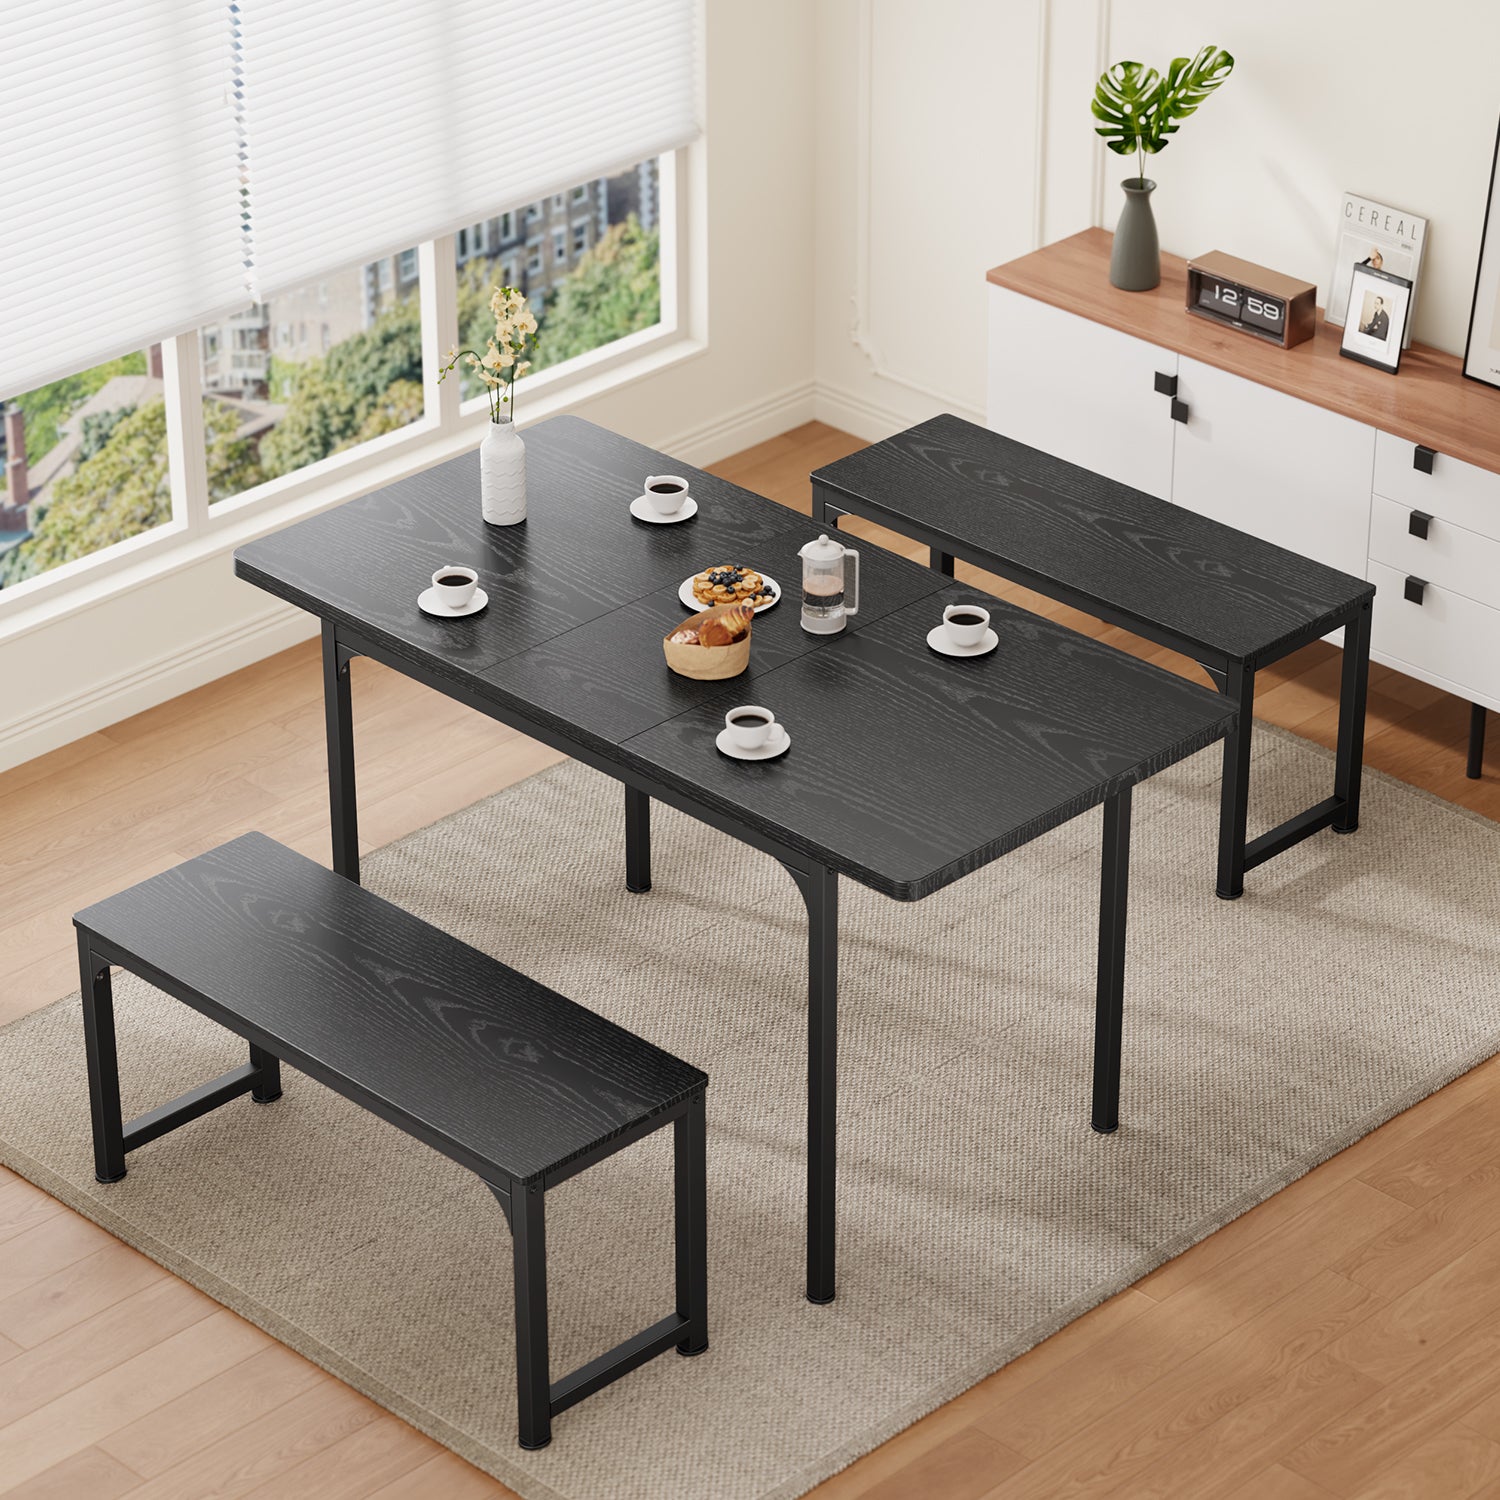 Gizoon TB73 55" Extendable Dining Table Set with 2 Benches for 4 to 6